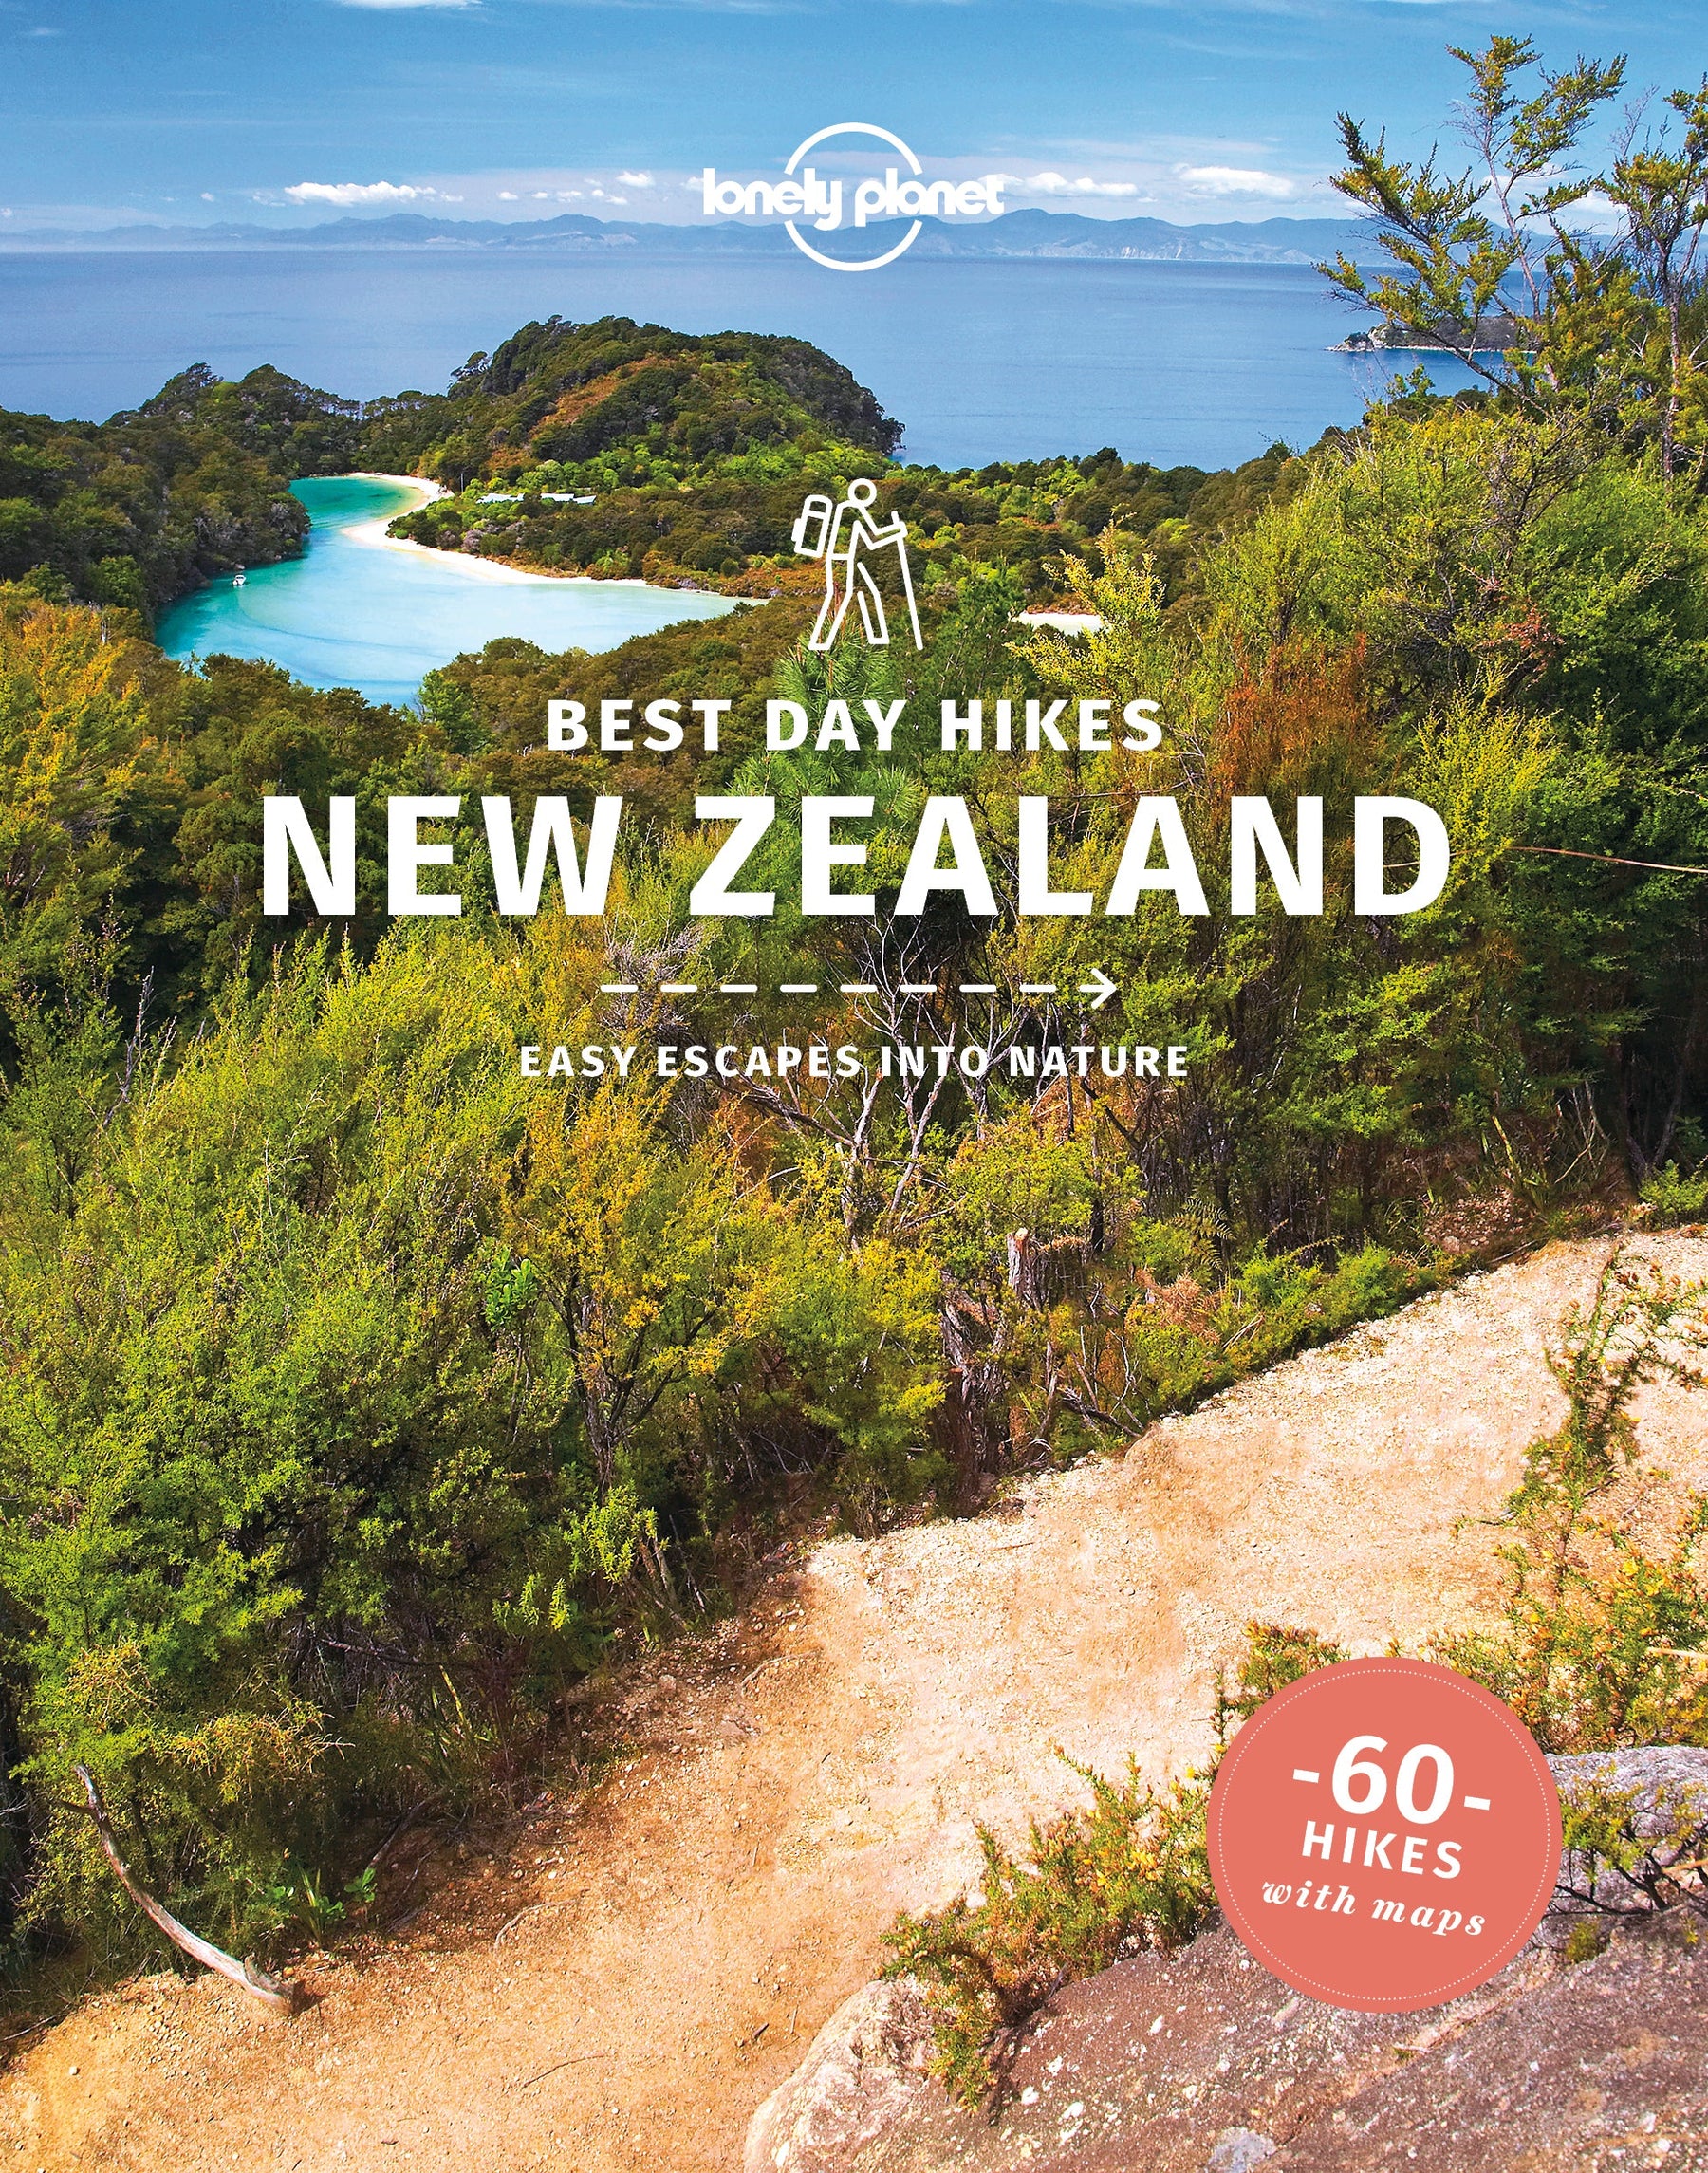 Best Day Hikes New Zealand